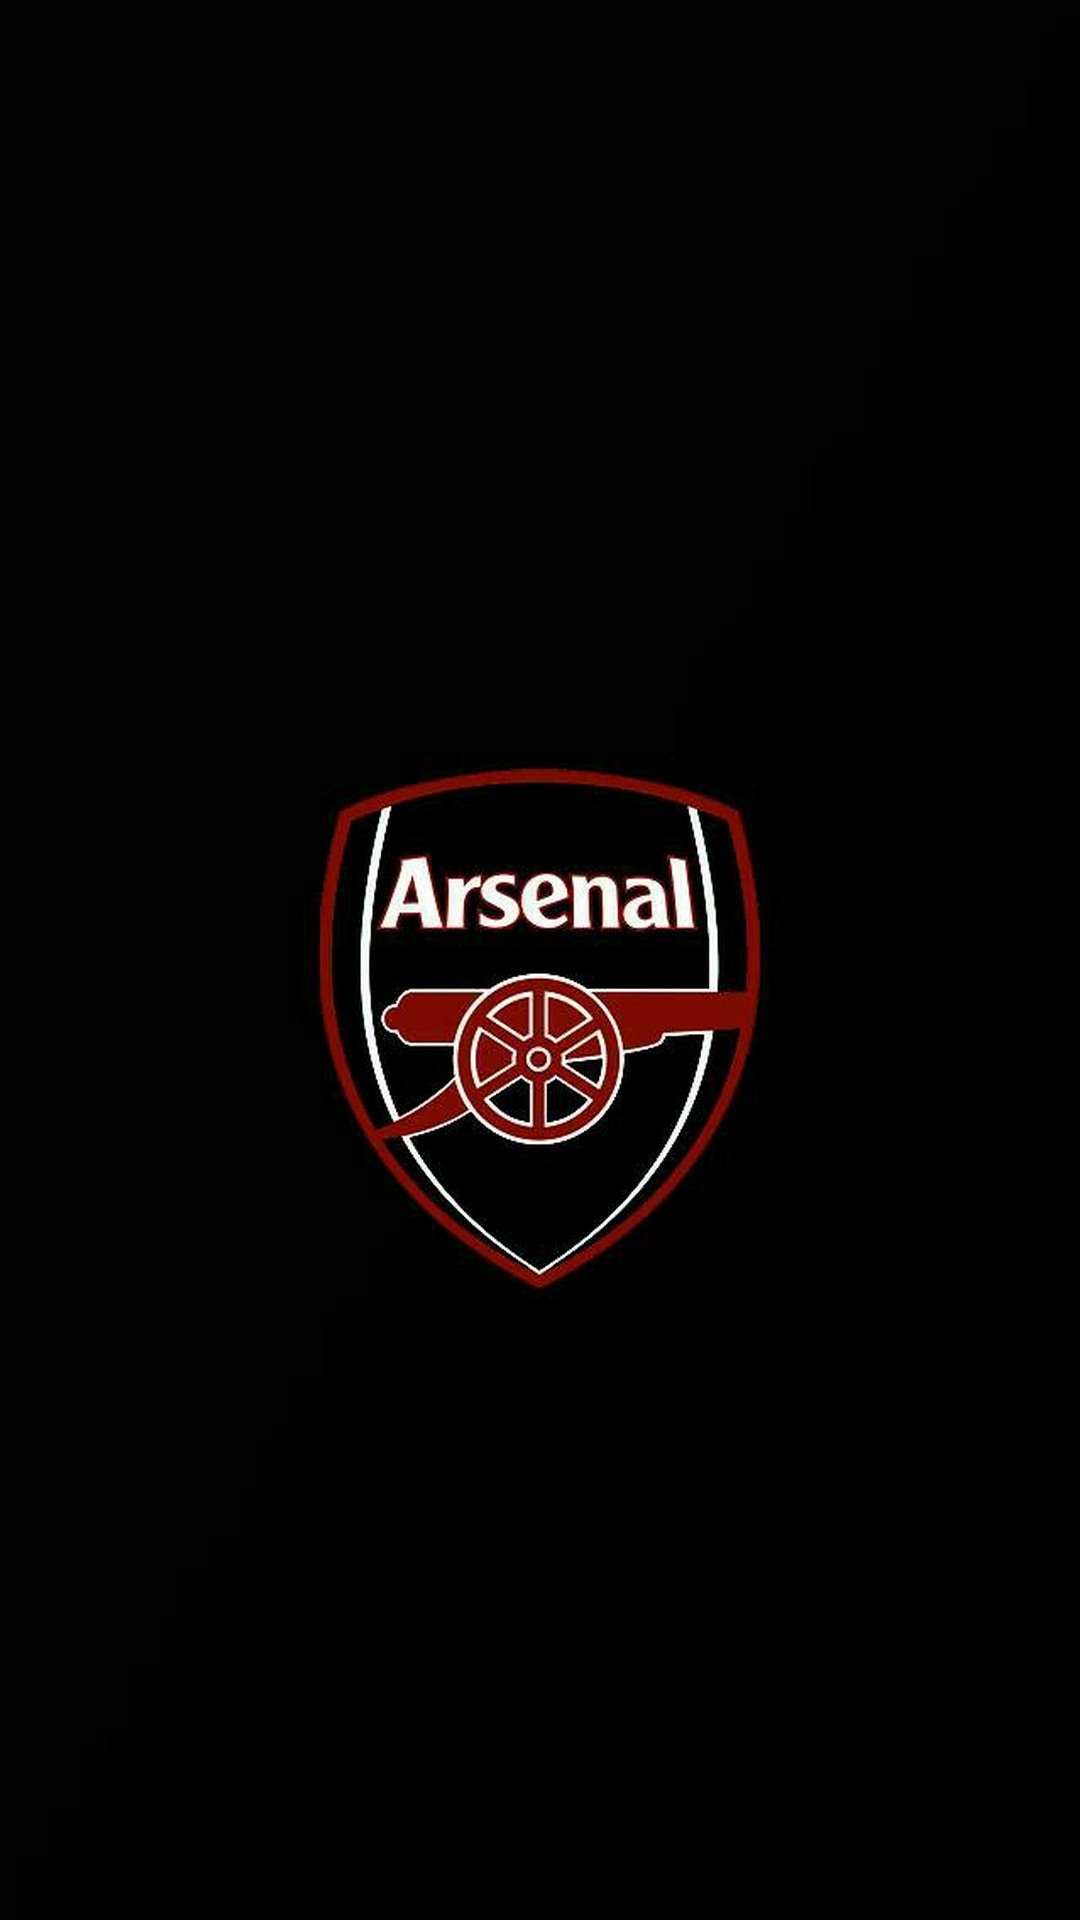 Arsenal FC Wallpaper Android with HD resolution 1080x1920